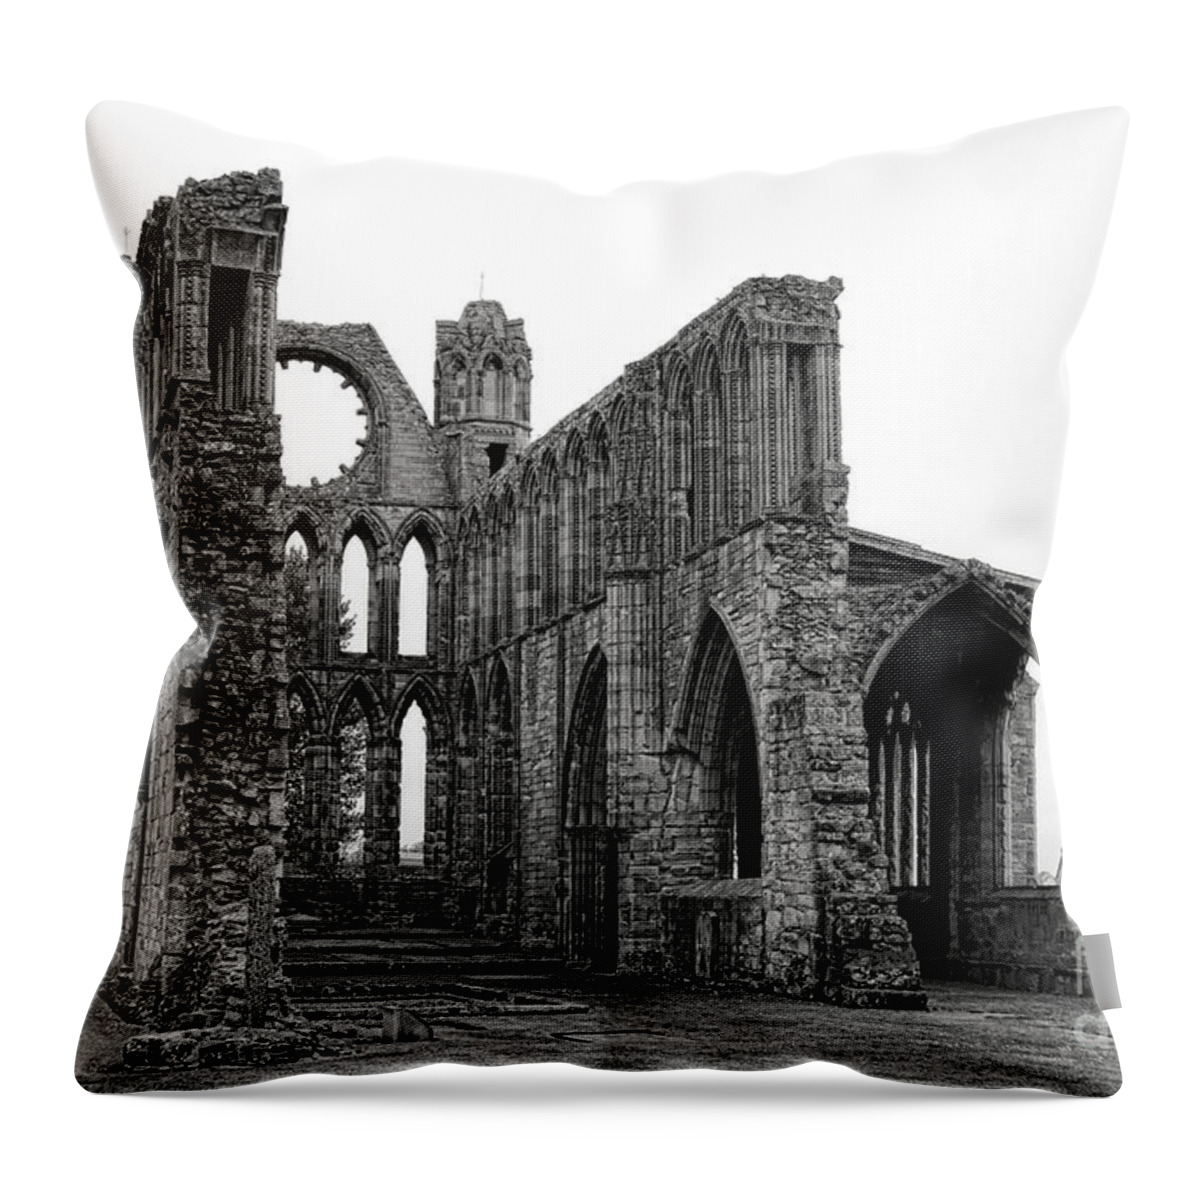 Elgin Throw Pillow featuring the photograph Elgin Cathedral Ruins by Olivier Le Queinec